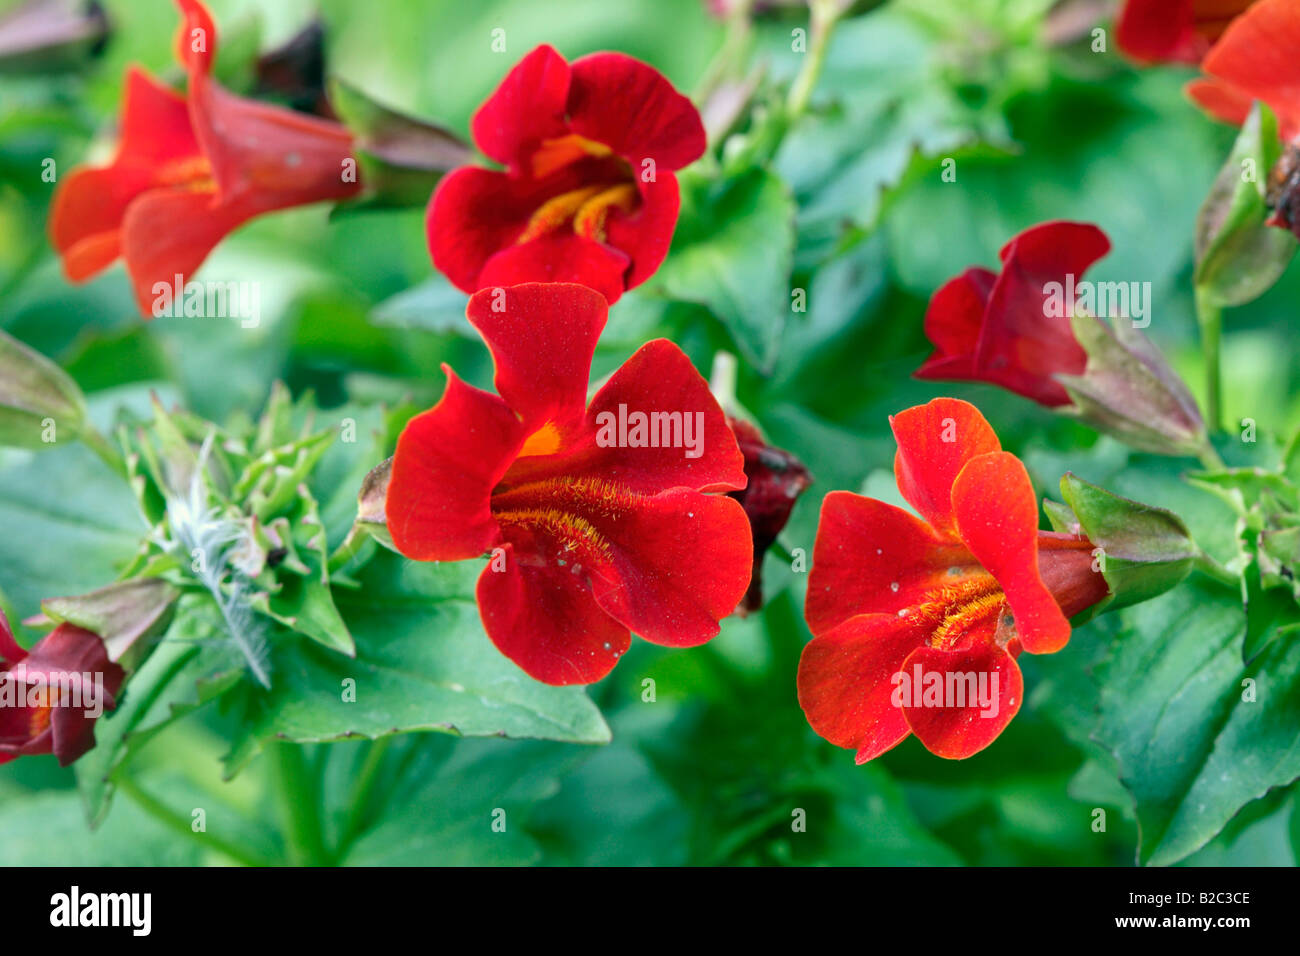 Allegheny Monkey Flower (Mimulus ringens), red flowers Stock Photo